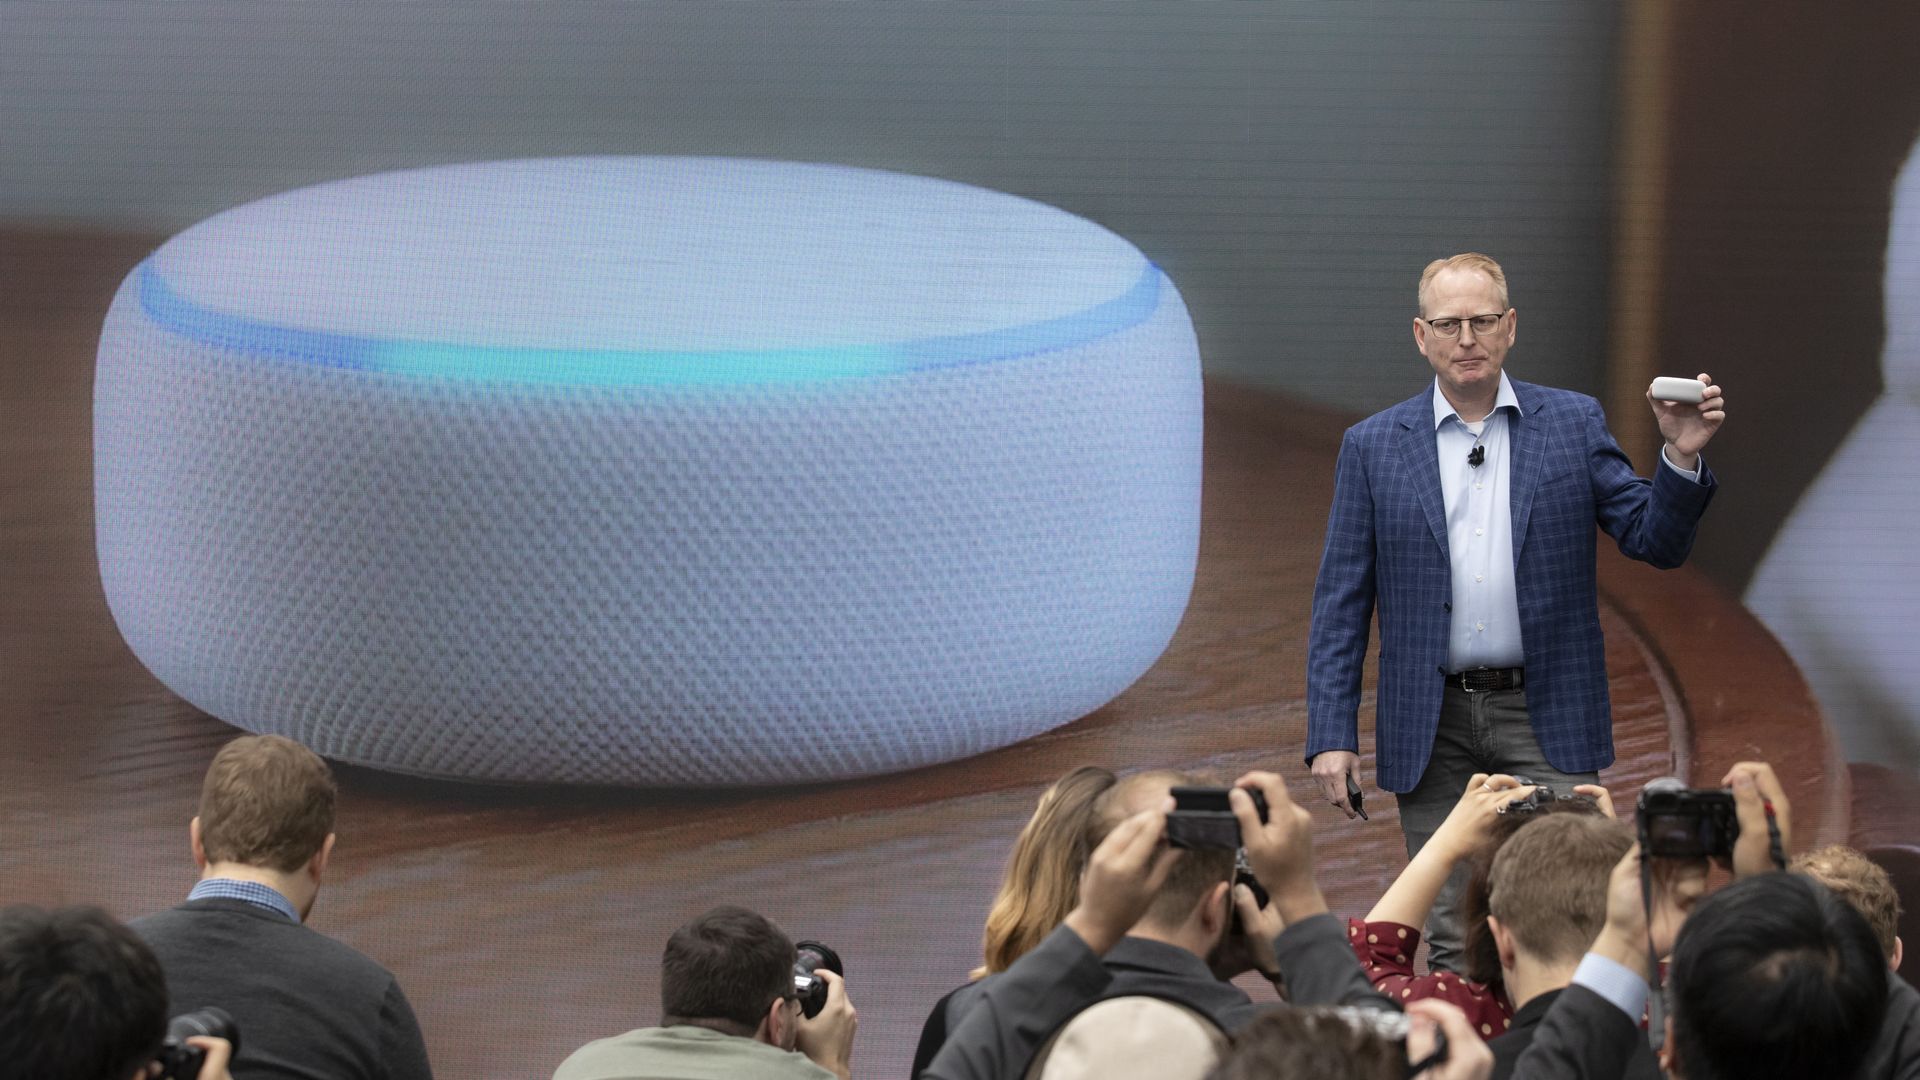 Photo of Amazon executive Dave Limp talking to an audience standing next to photo of a smart speaker